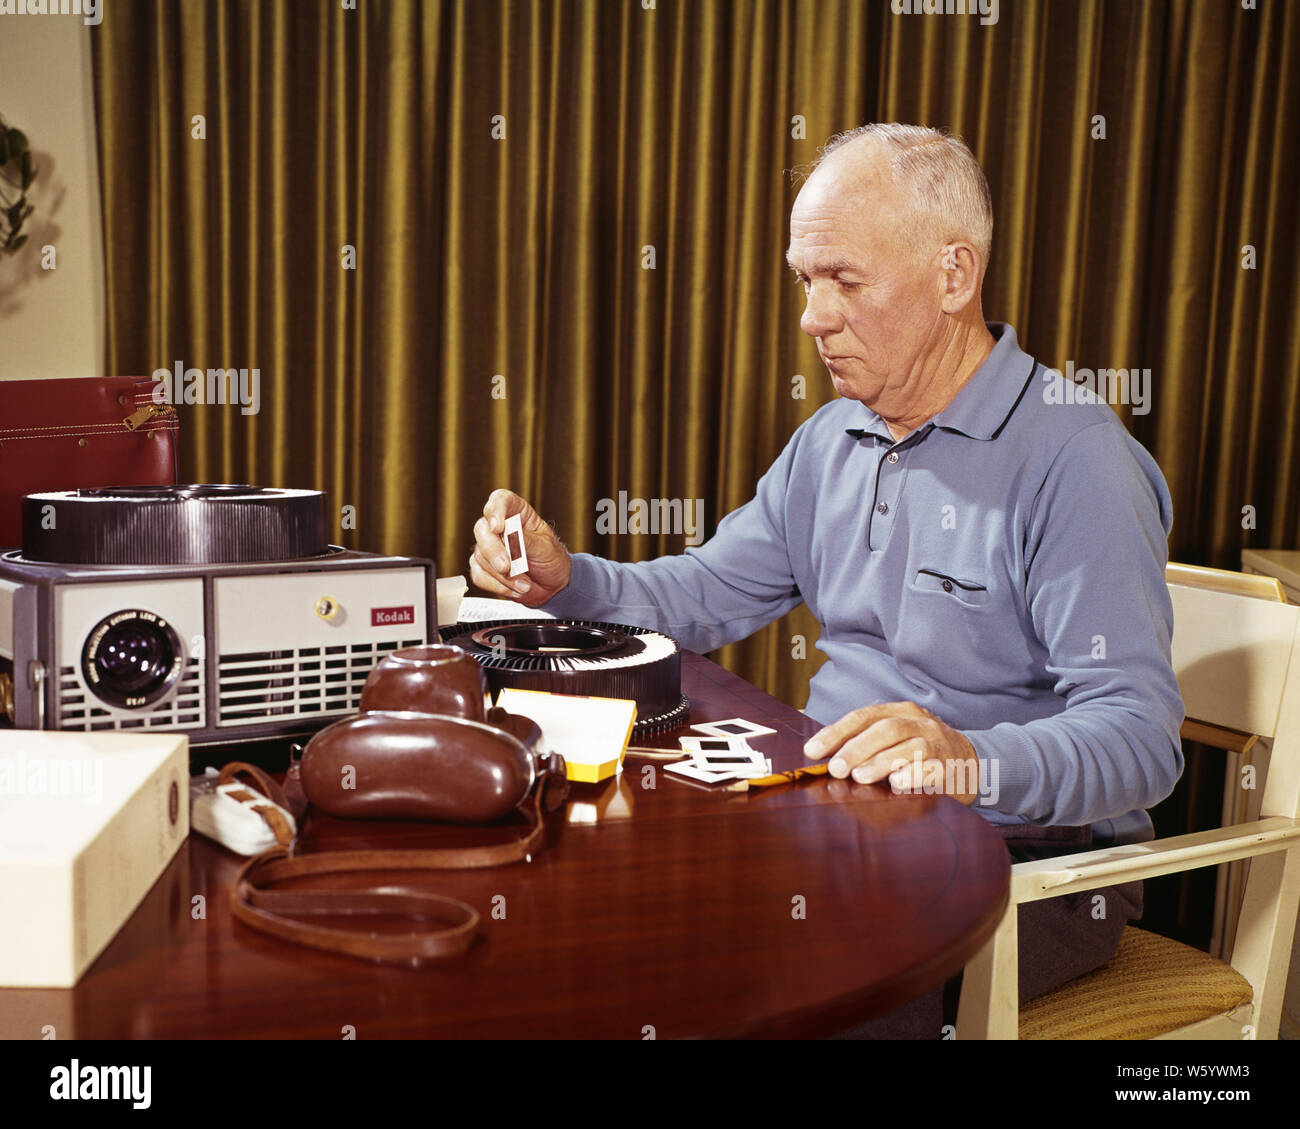 1960s SENIOR MAN AT HOME VIEWING EDITING FAMILY VACATION 35MM PHOTO SLIDES BESIDE CAMERA AND PROJECTOR - ks5139 HAR001 HARS ELDER HEALTHINESS HOME LIFE COPY SPACE HALF-LENGTH PERSONS INSPIRATION CAMERAS CARING MALES SENIOR MAN SENIOR ADULT SENIOR WOMAN SUCCESS TIME OFF SKILL ACTIVITY AMUSEMENT DREAMS PROJECTOR HAPPINESS OLDSTERS OLDSTER DISCOVERY HOBBY LEISURE TRIP INTEREST AND GETAWAY CHOICE EXCITEMENT HOBBIES KNOWLEDGE RECREATION CAROUSEL PASTIME PRIDE PLEASURE HOLIDAYS ELDERS SLIDES CONNECTION REVIEWING CONCEPTUAL BESIDE PHOTOGRAPHY STYLISH VIEWER 35MM ELDERLY MAN CREATIVITY ELECTRONIC Stock Photo